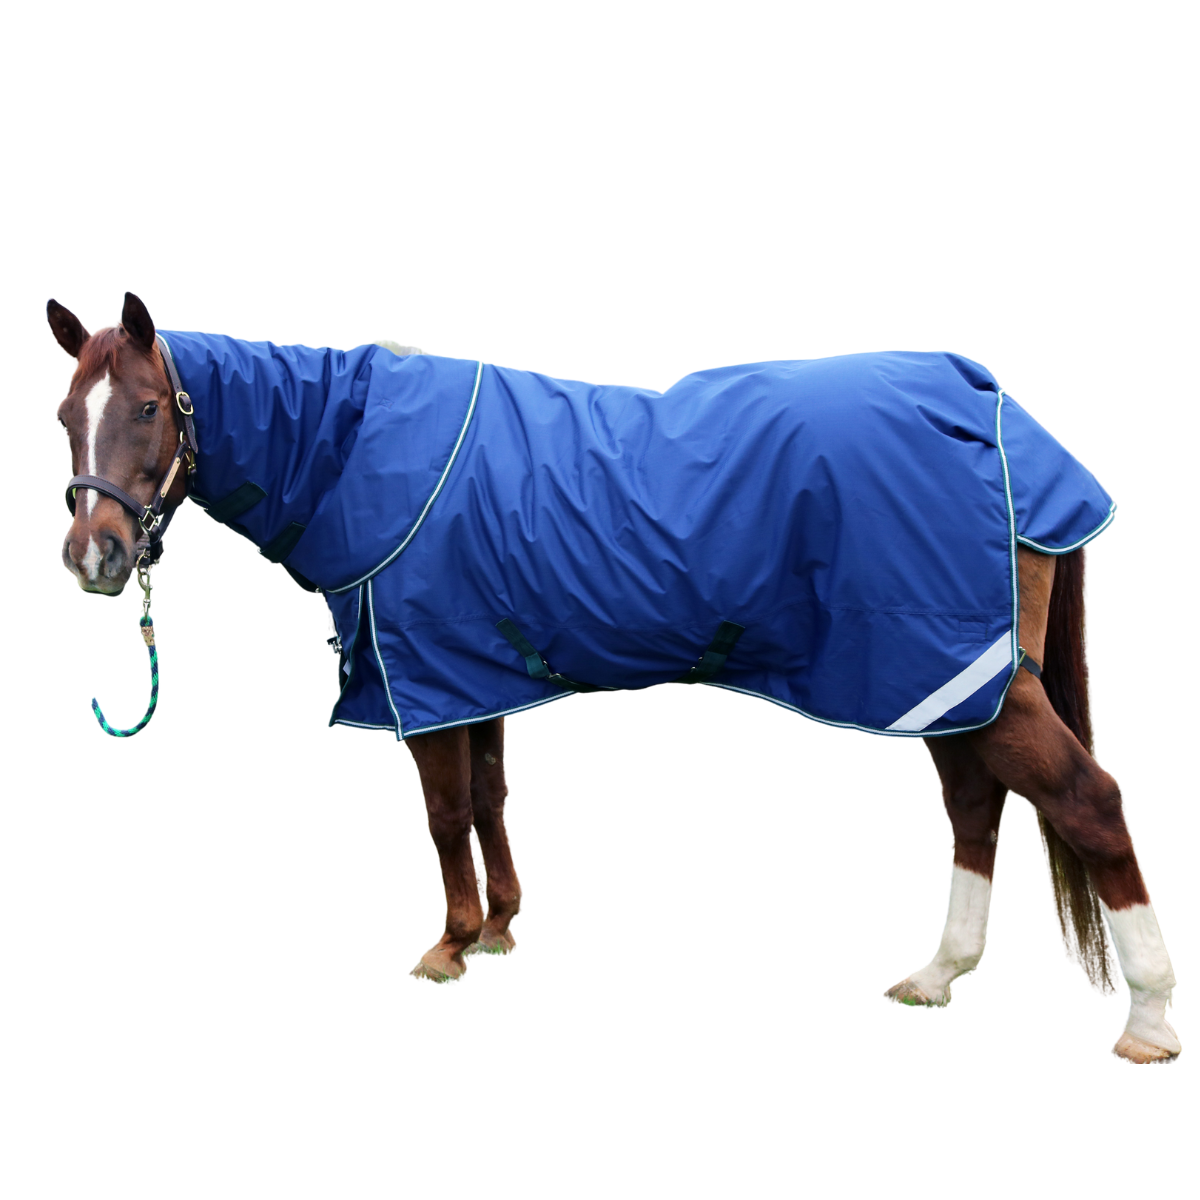 Pro-Trainer Turnout Blanket with Detachable Neck Cover, 1200D - Navy